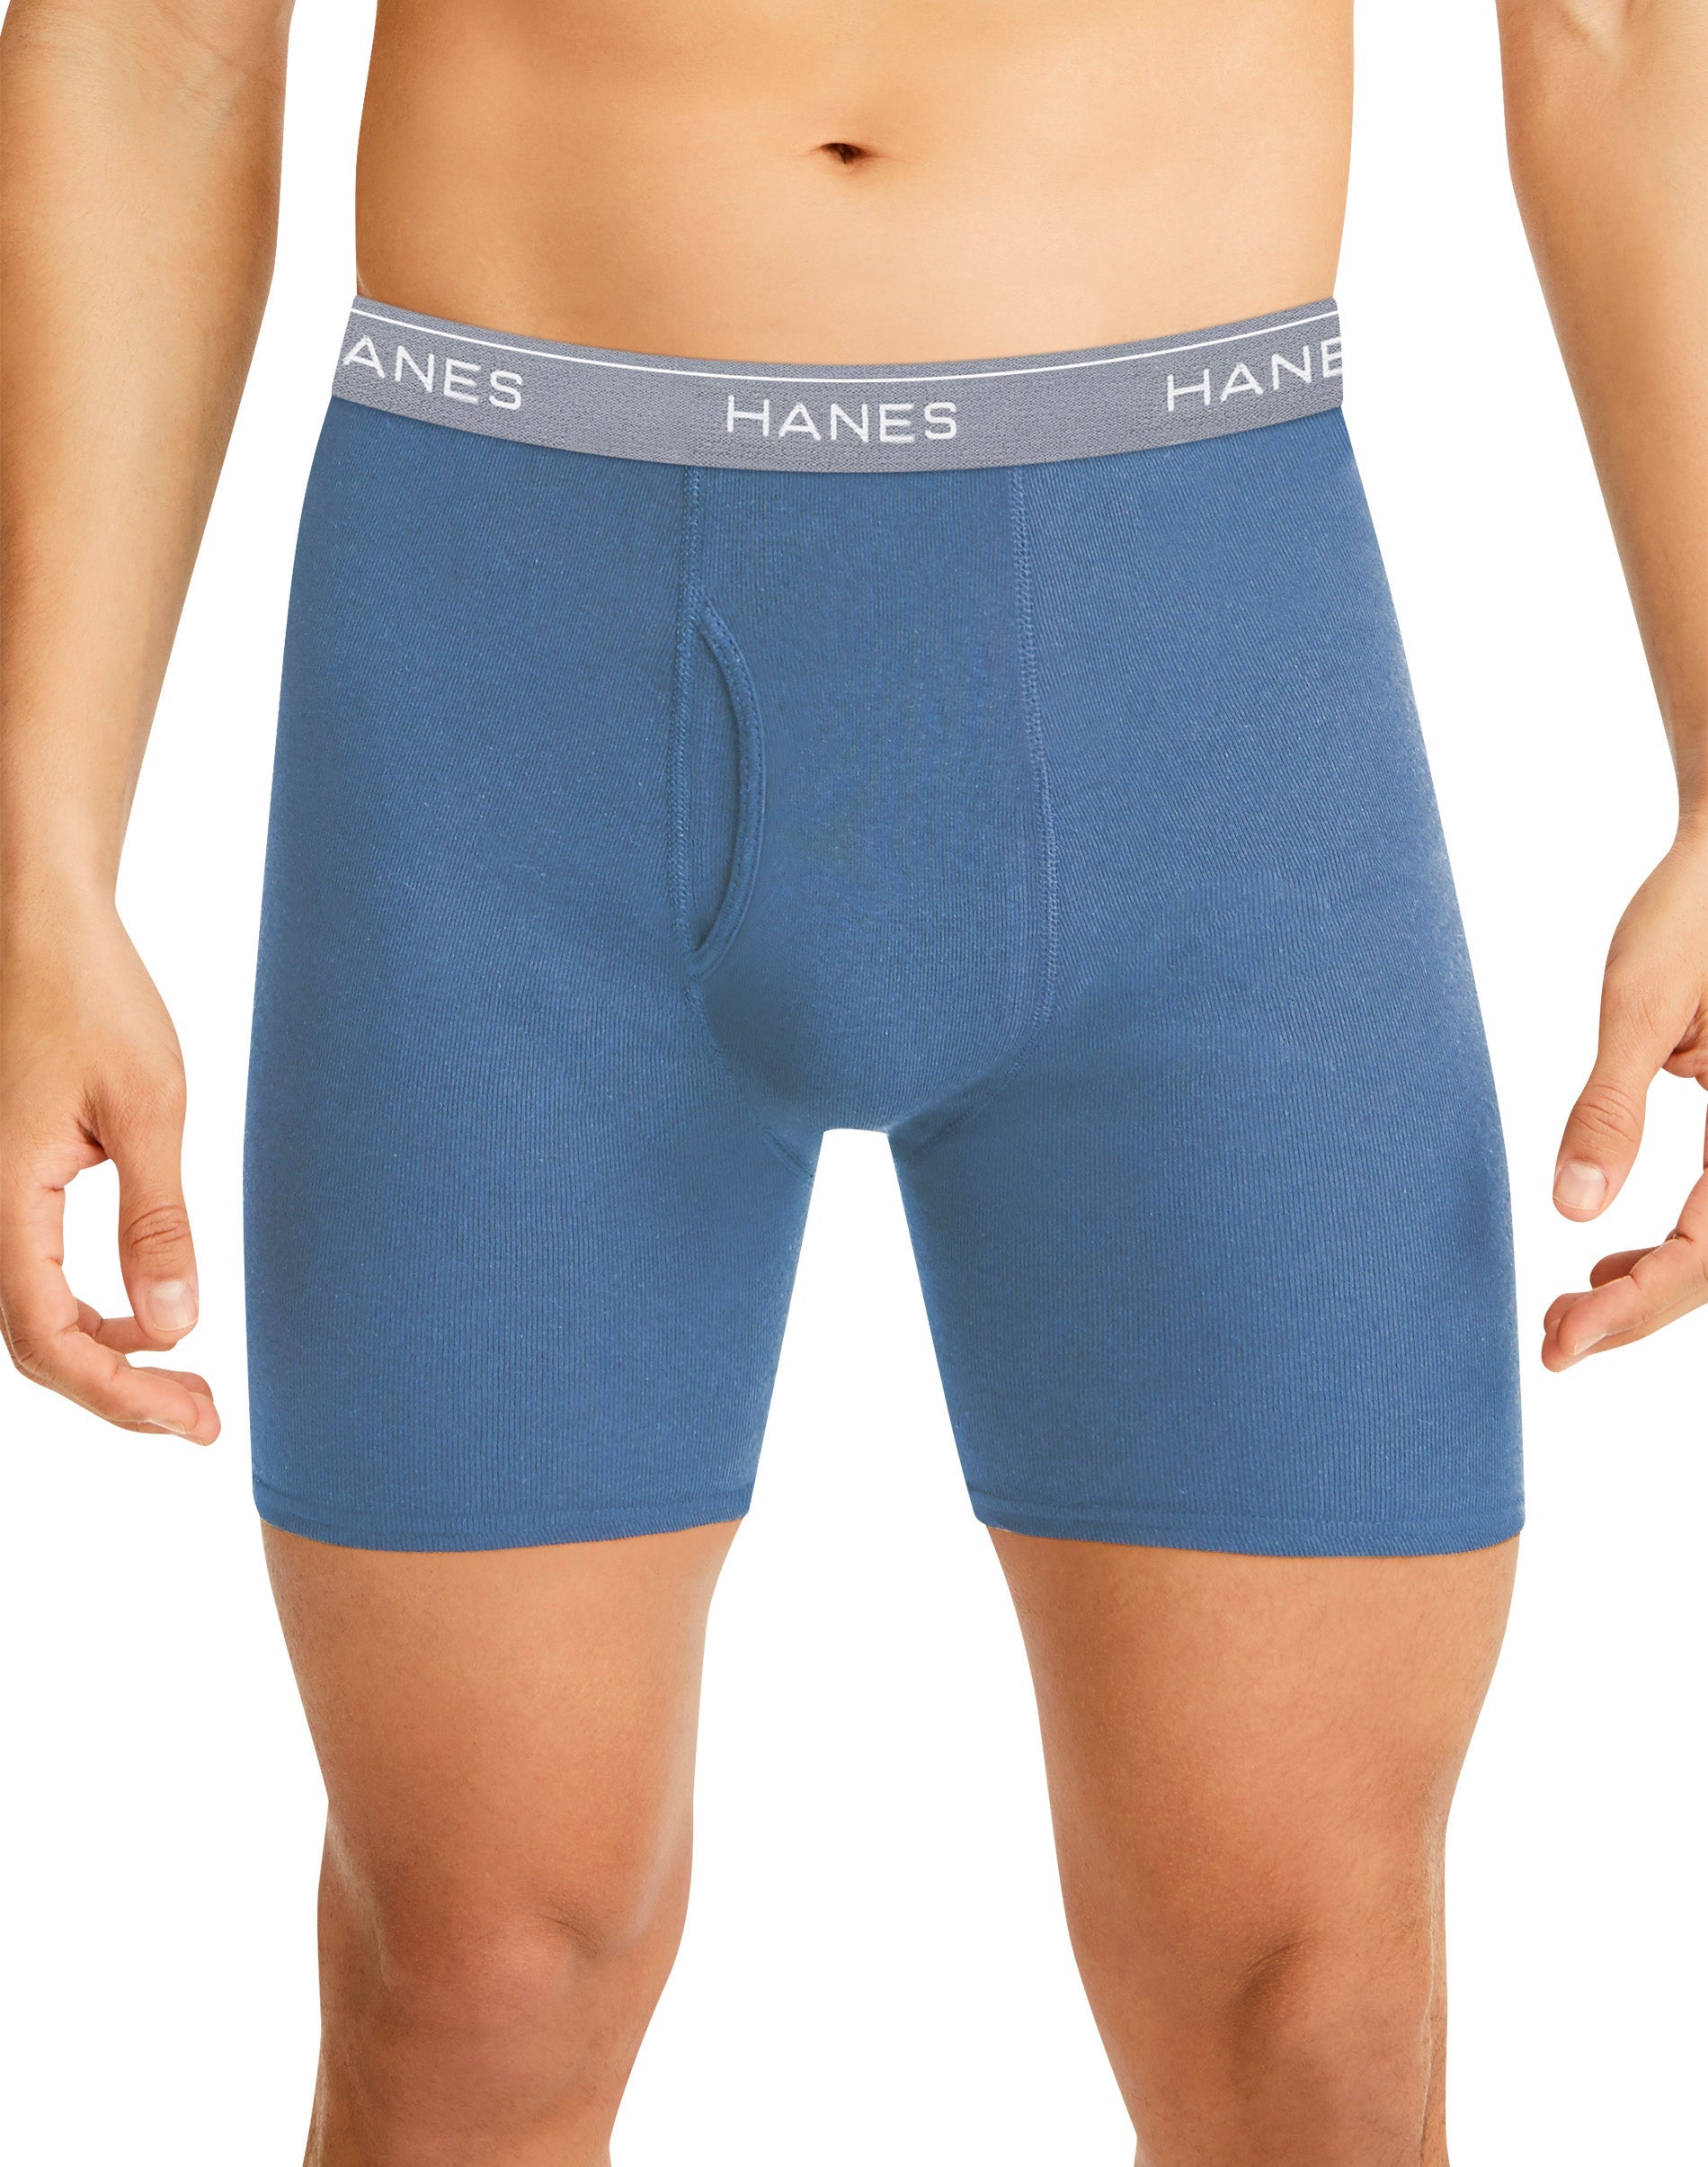 Hanes Red Label Men's 9-Pack Brief, White, Small 